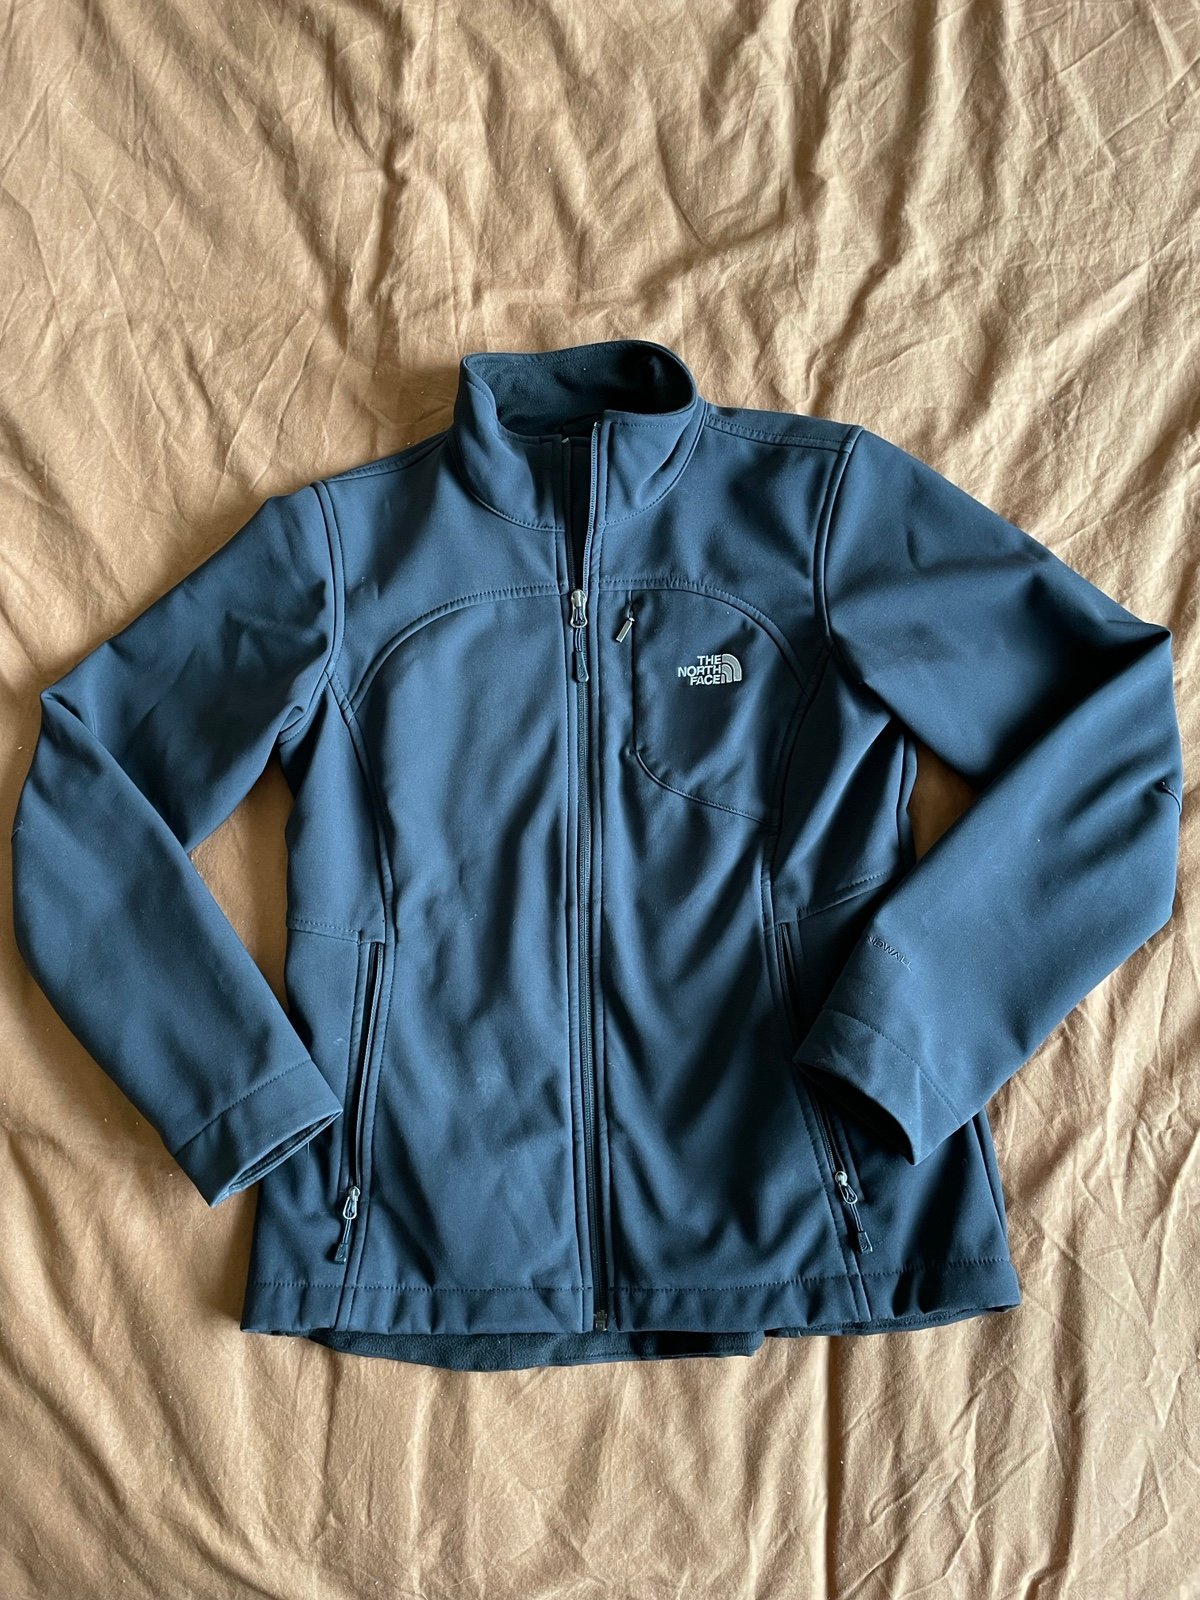 the Lowest price The North Face coat NdG3cHg0a just buy